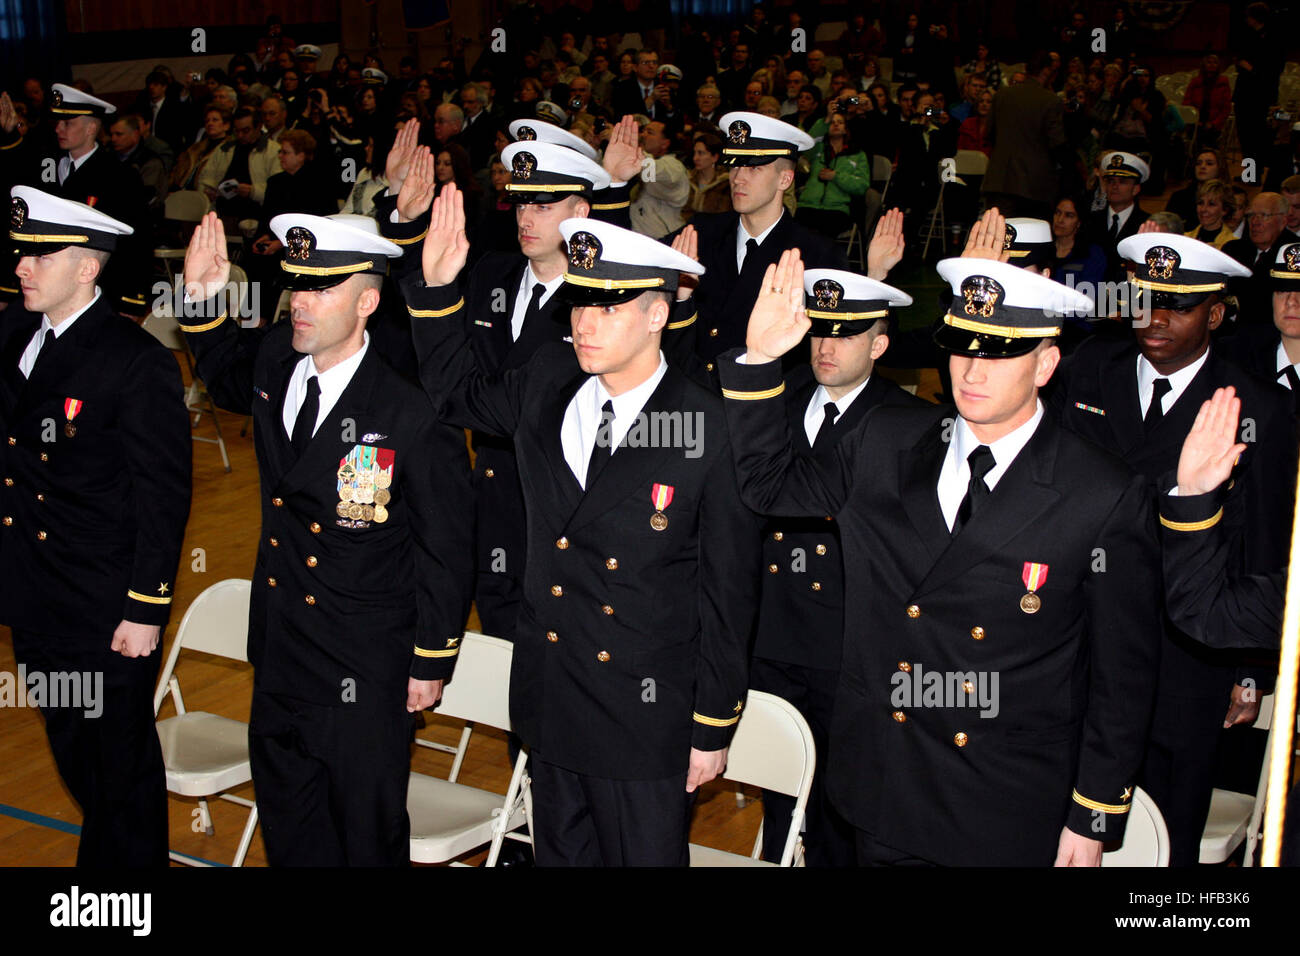 Officer candidates take the oath of office during a commissioning ceremony following graduation from Officer Candidate School at Naval Station Newport. (U.S. Navy photo by Gregg Kohlweiss) Commissioning ceremony 258125 Stock Photo